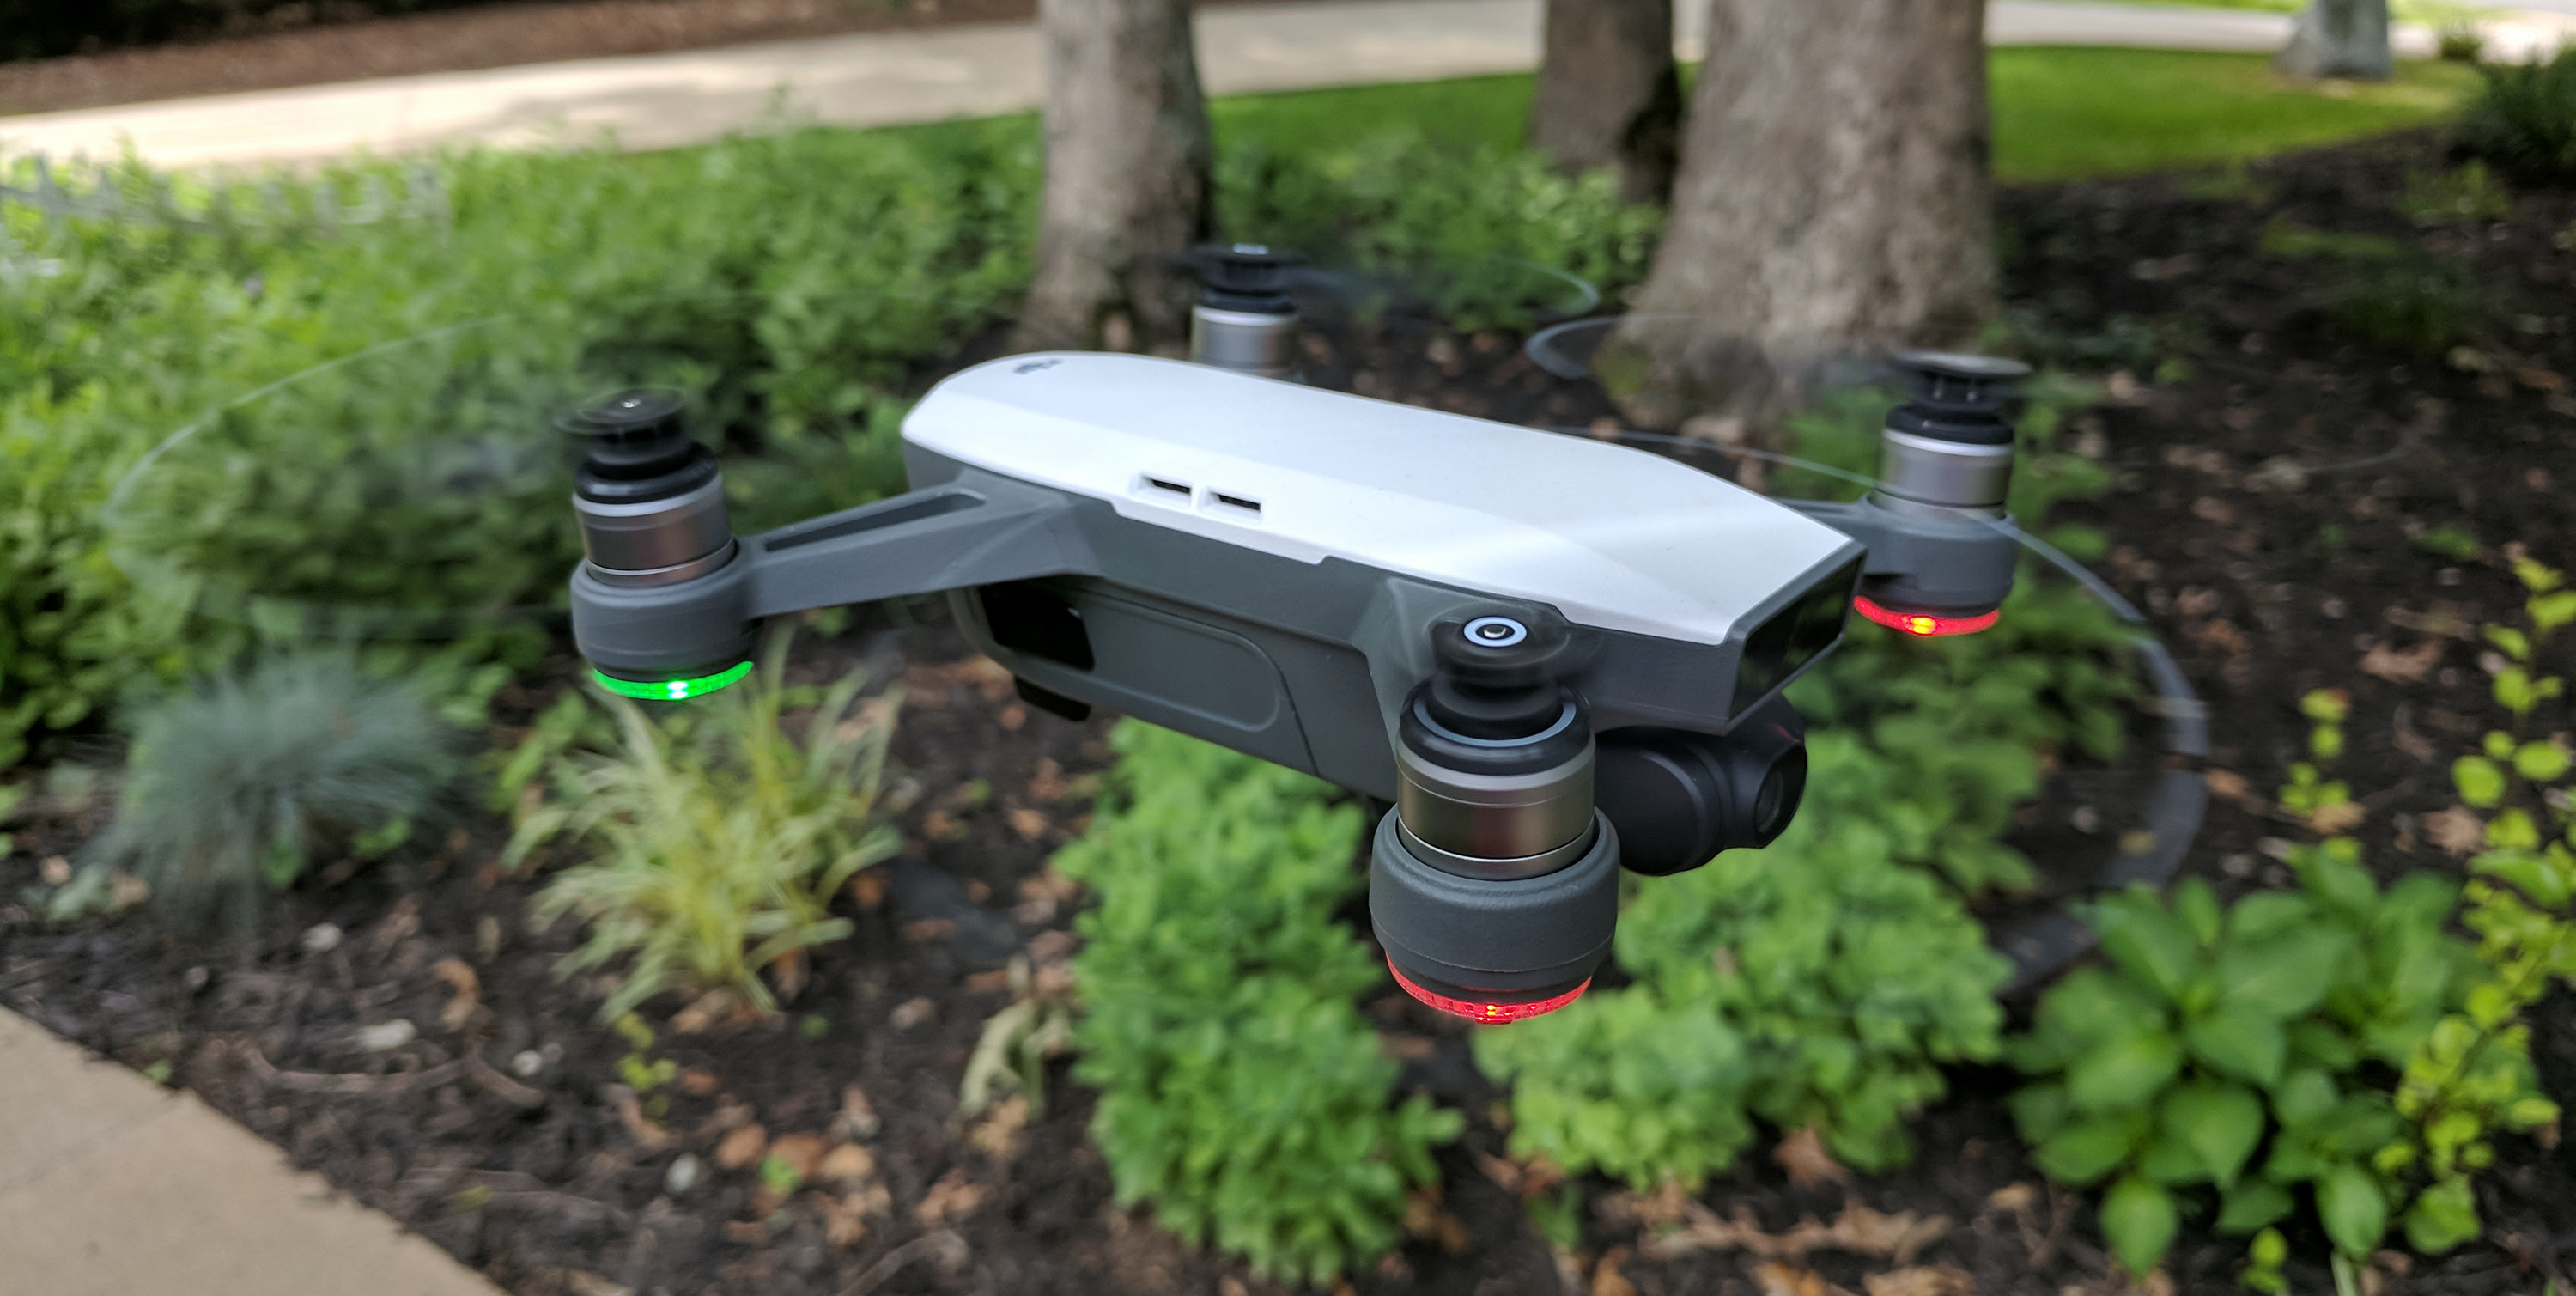 connecting to dji spark